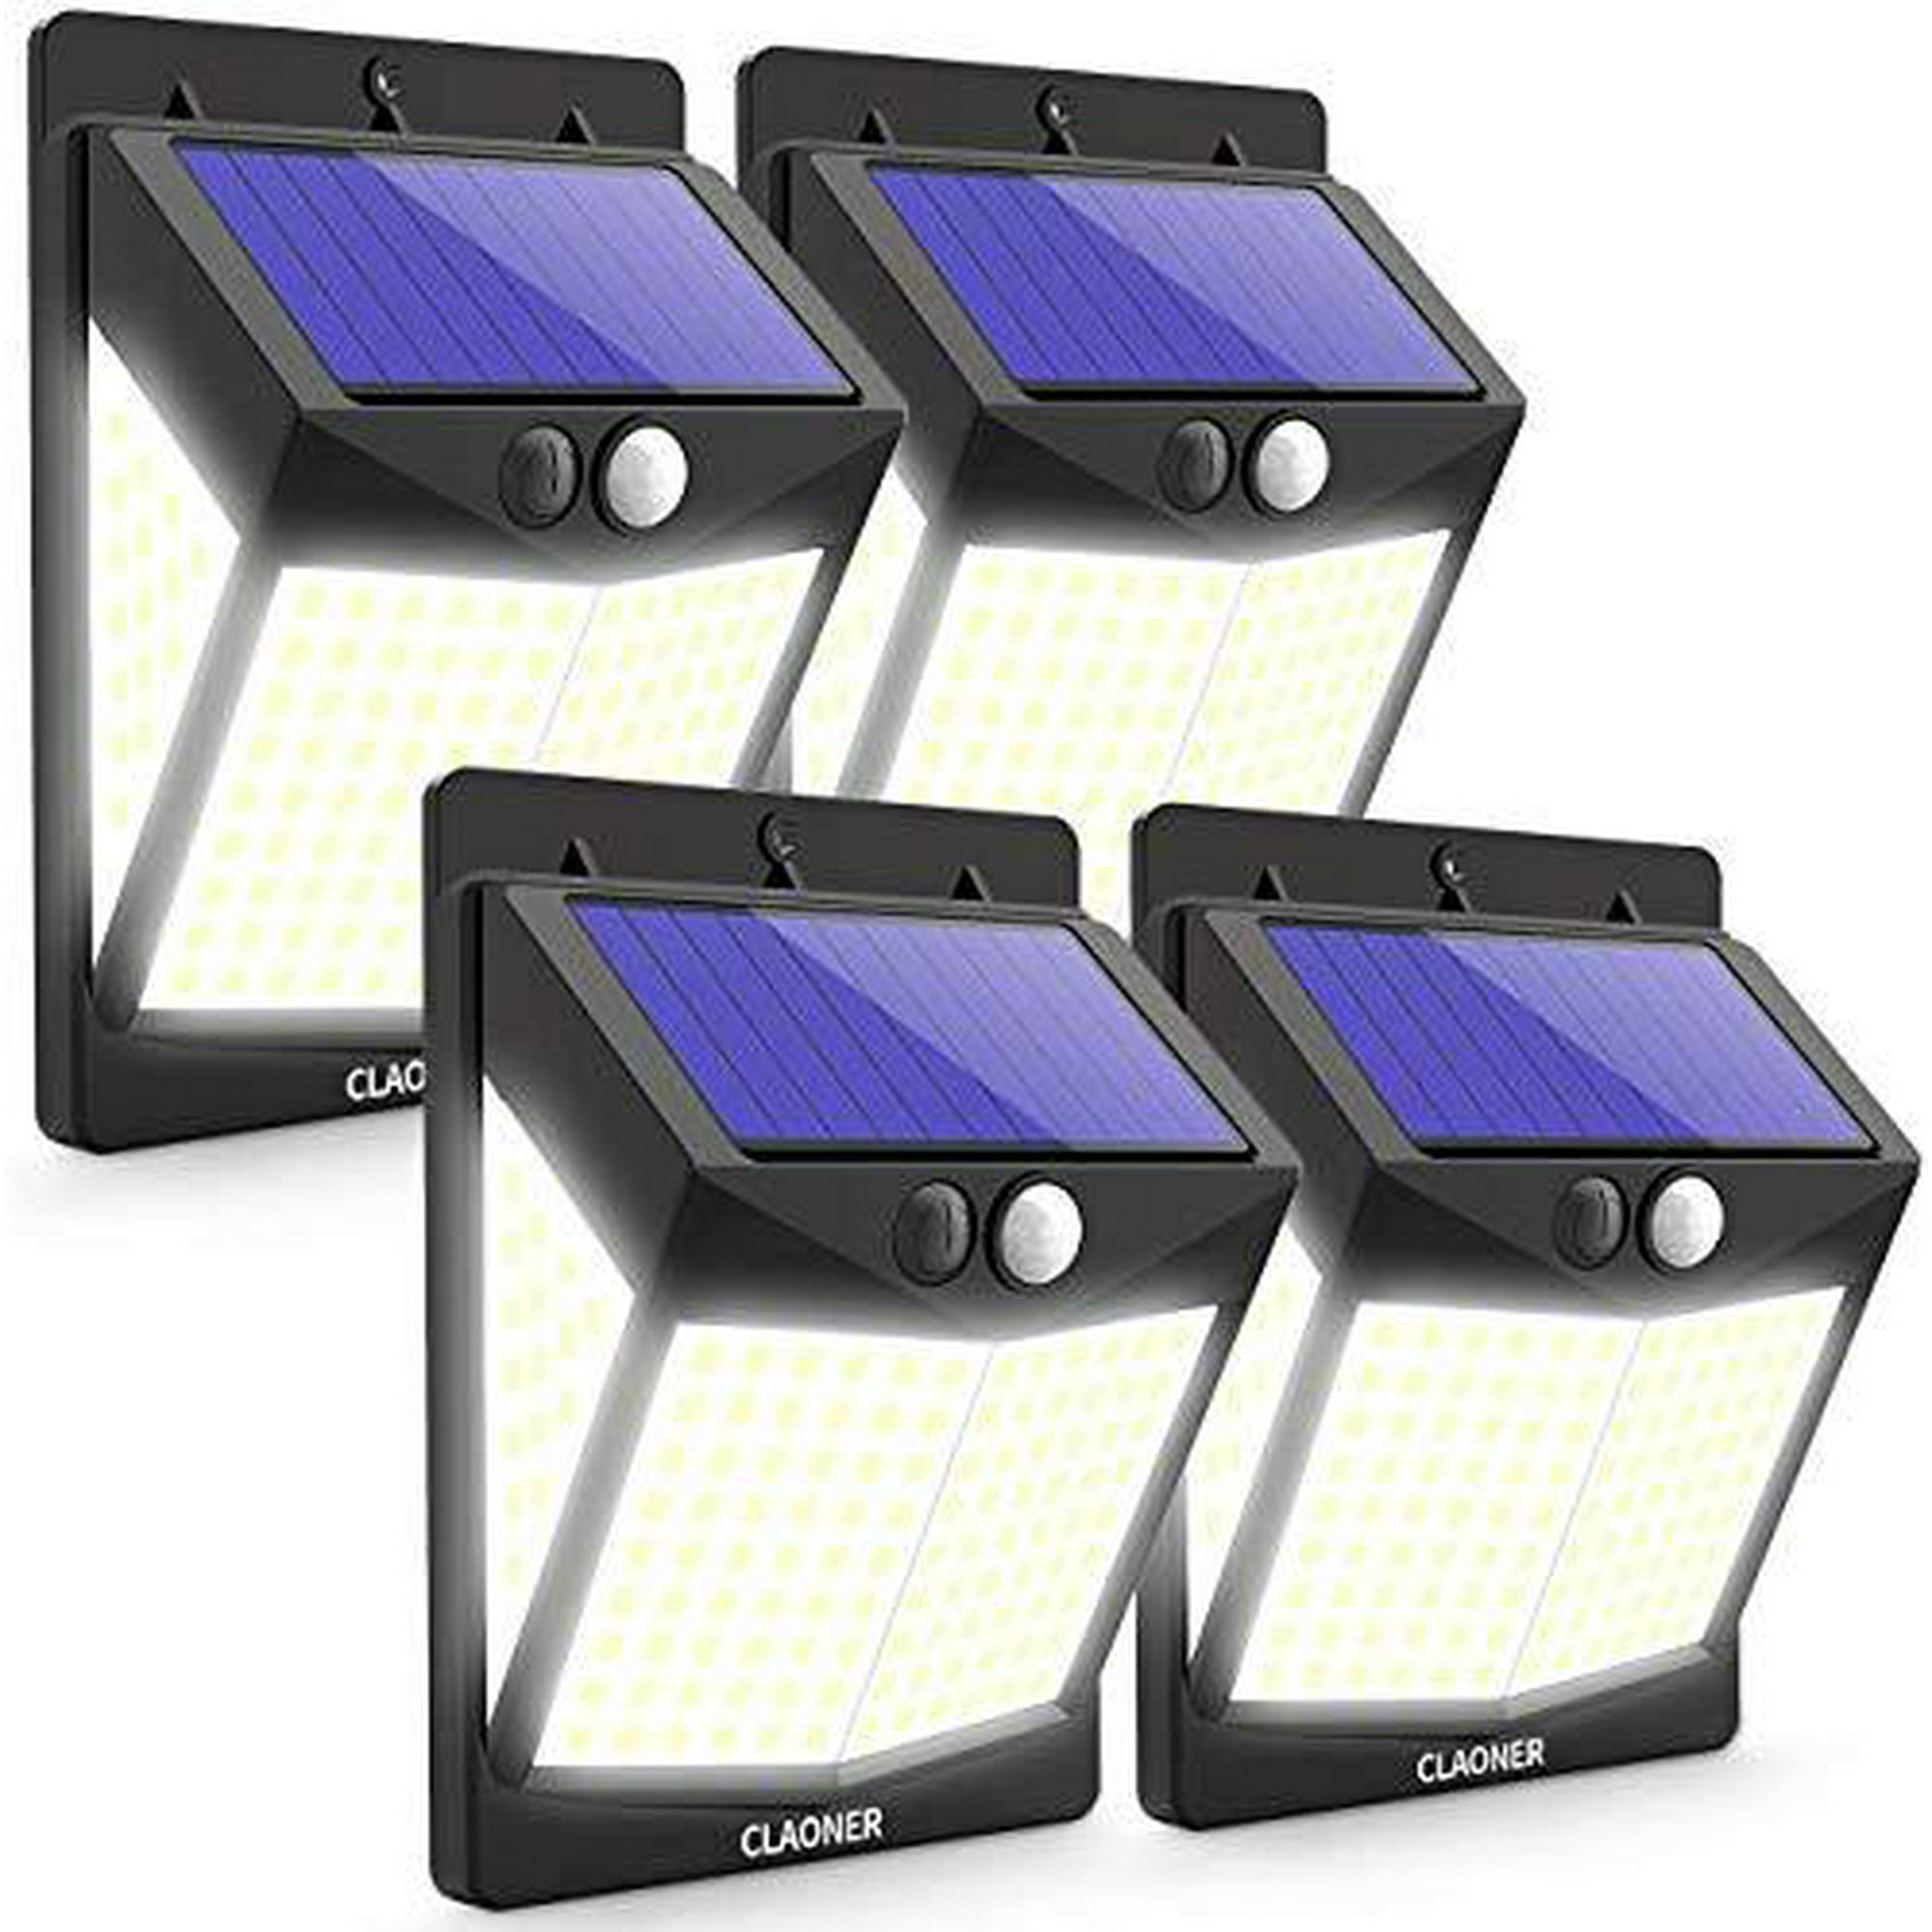 Solar Outdoor Motion Sensor Lights and 3 Modes Security Permanent On all nigh... 